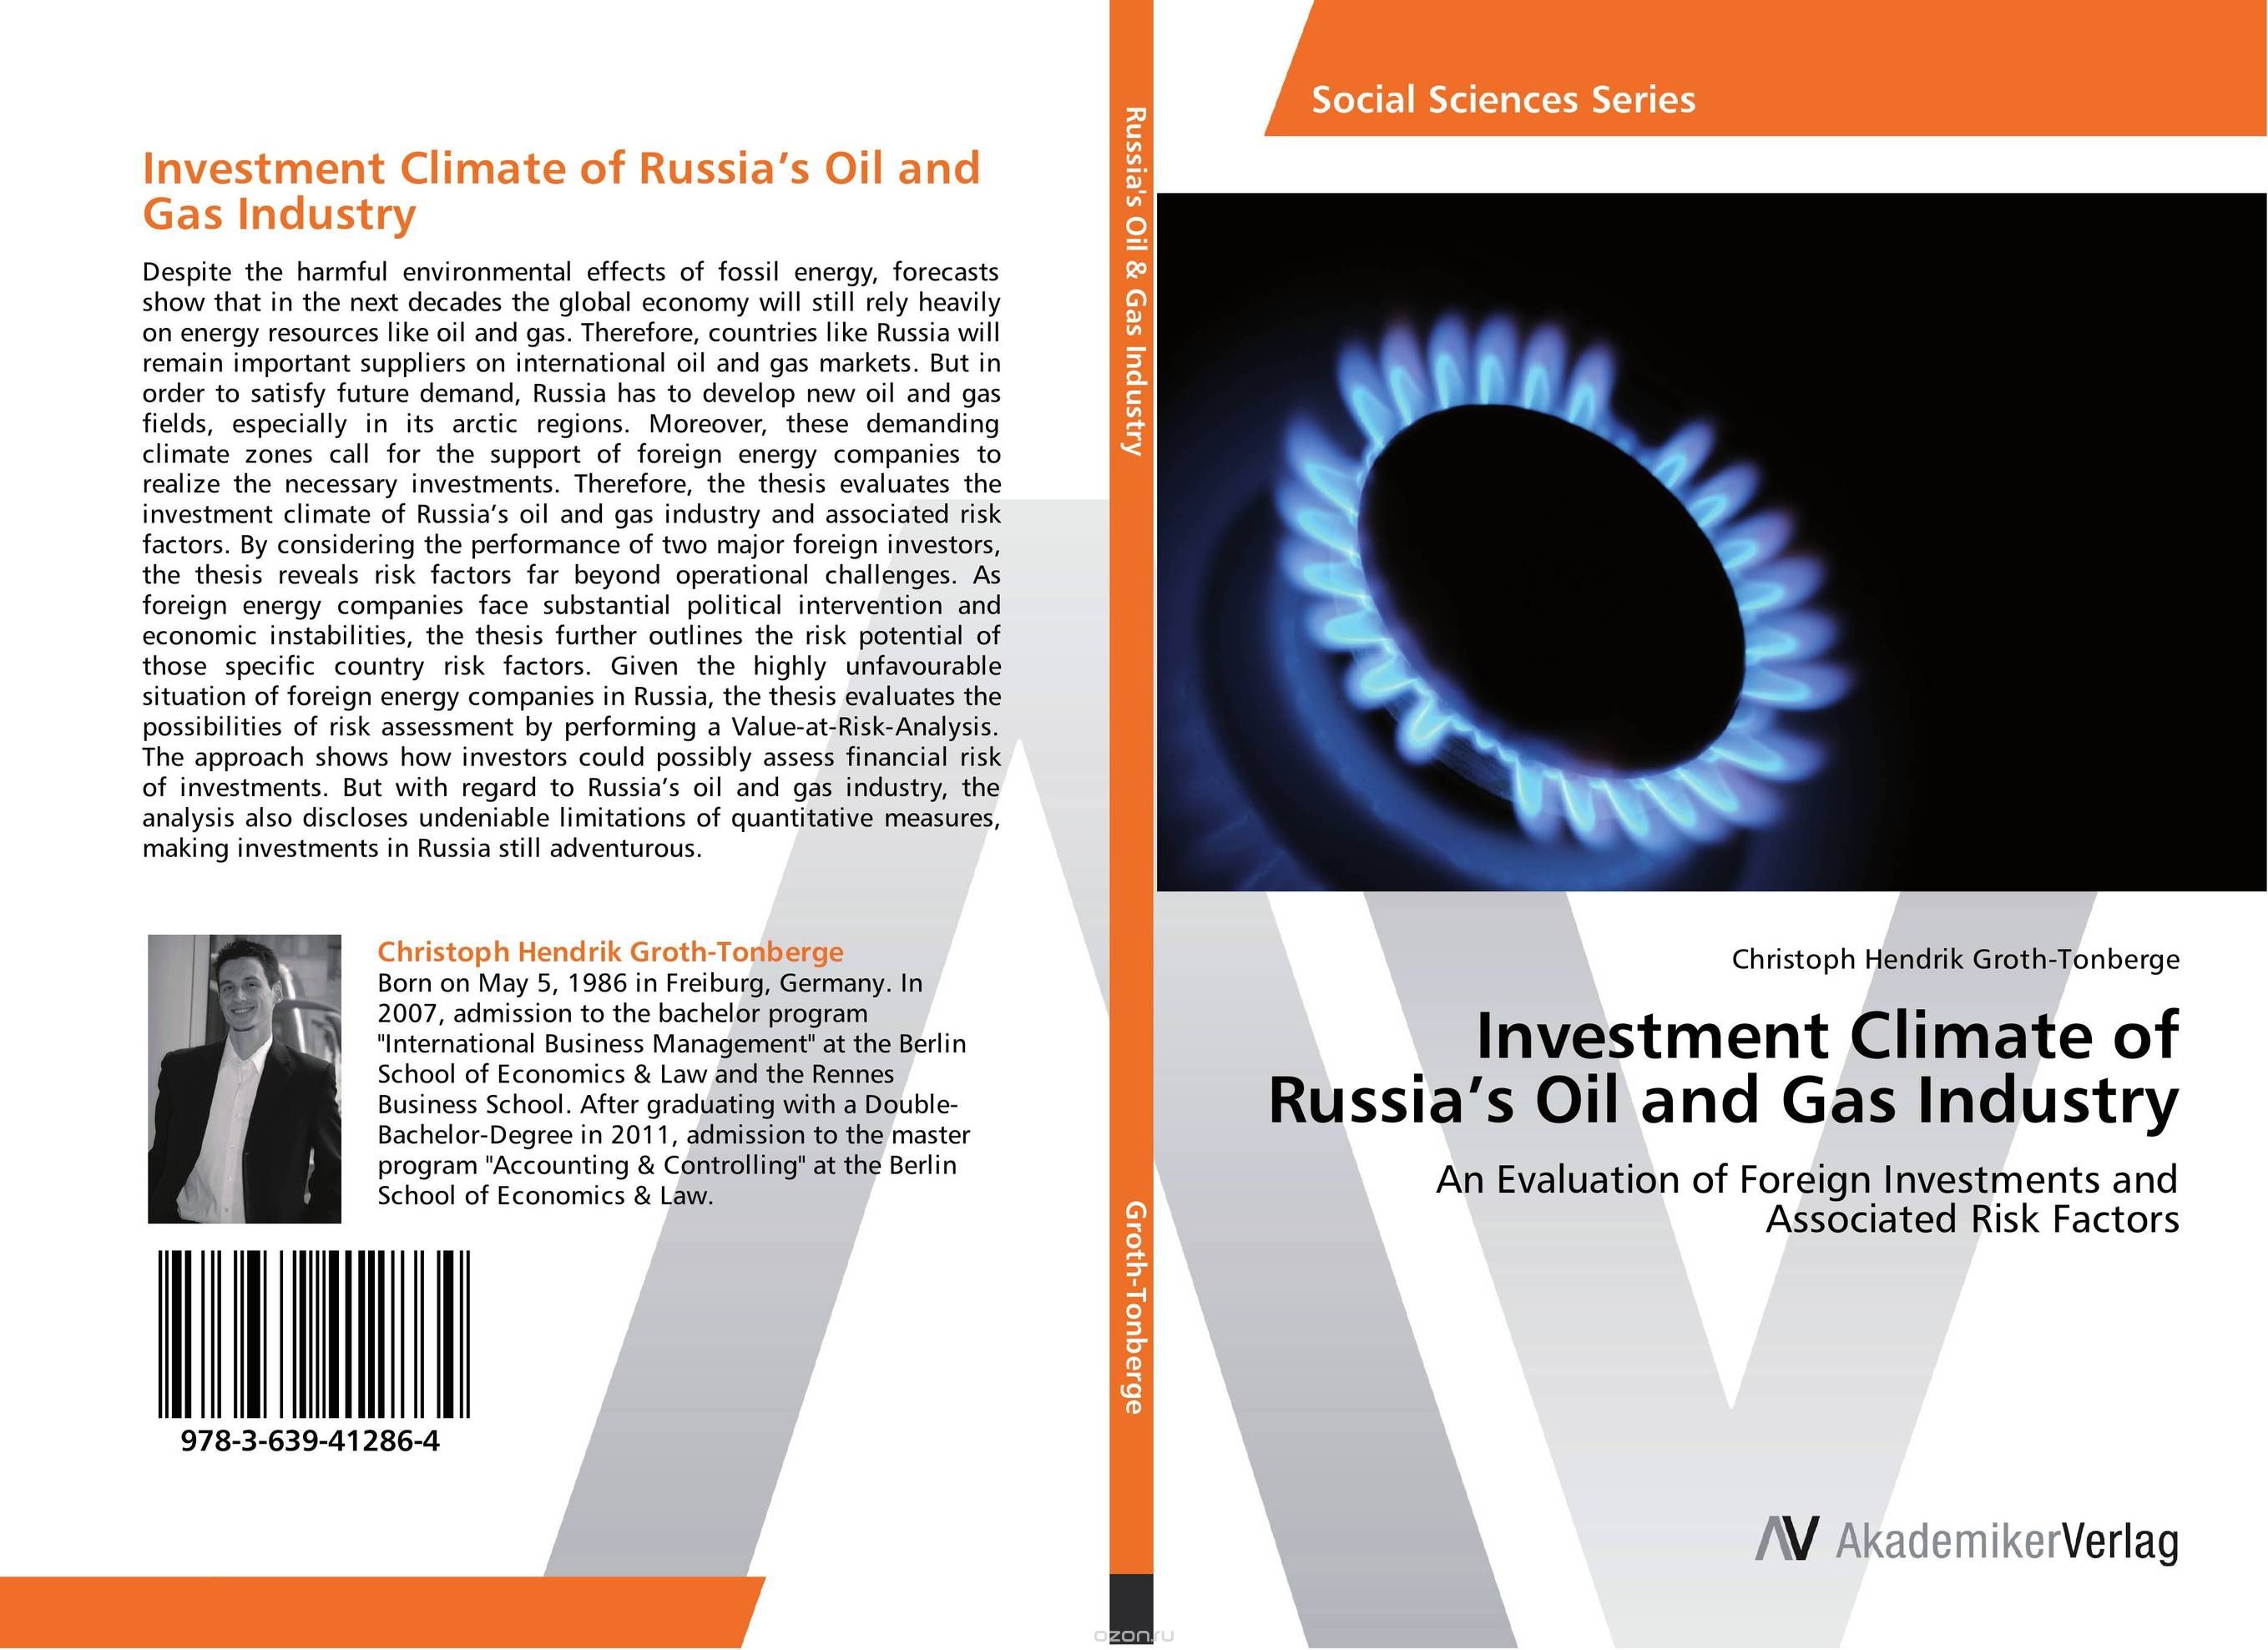 Investment Climate of Russia’s Oil and Gas Industry